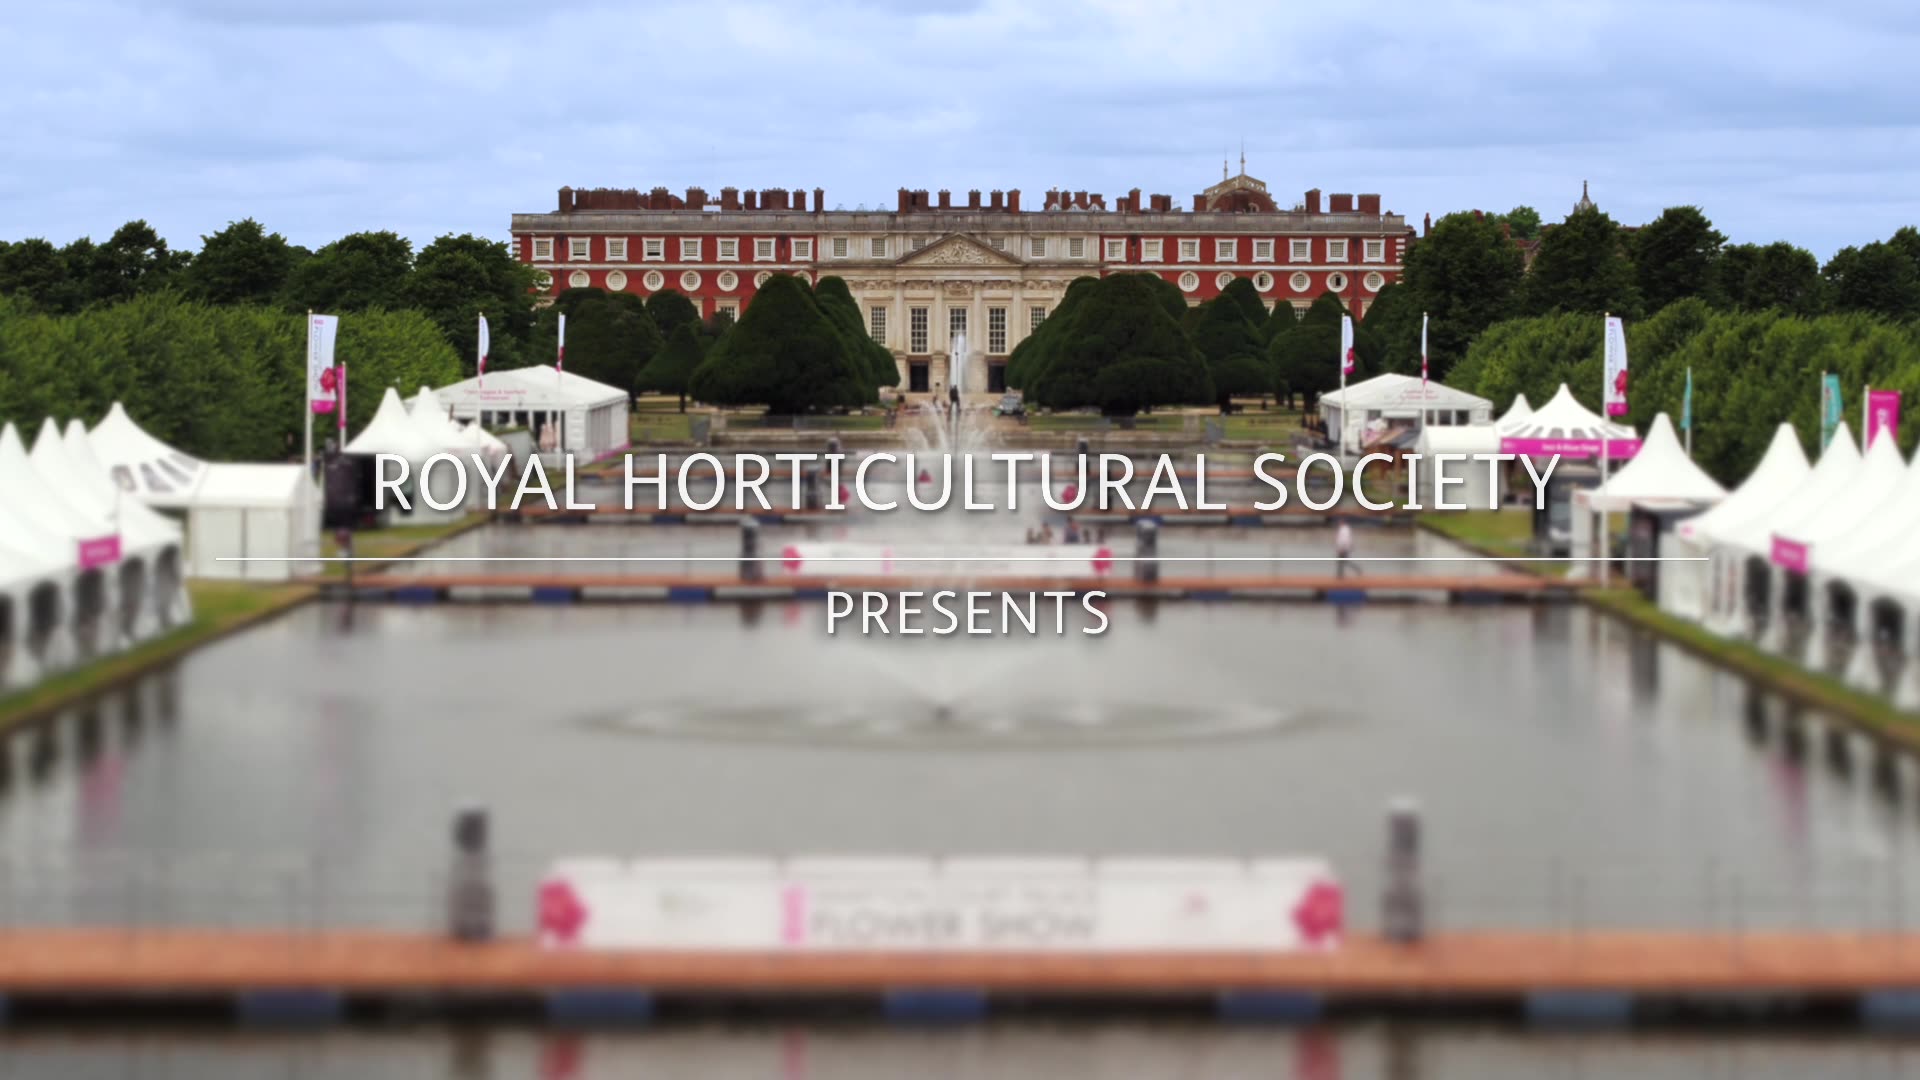 Royal Horticulural Society Hampton Court Palace Flower Show